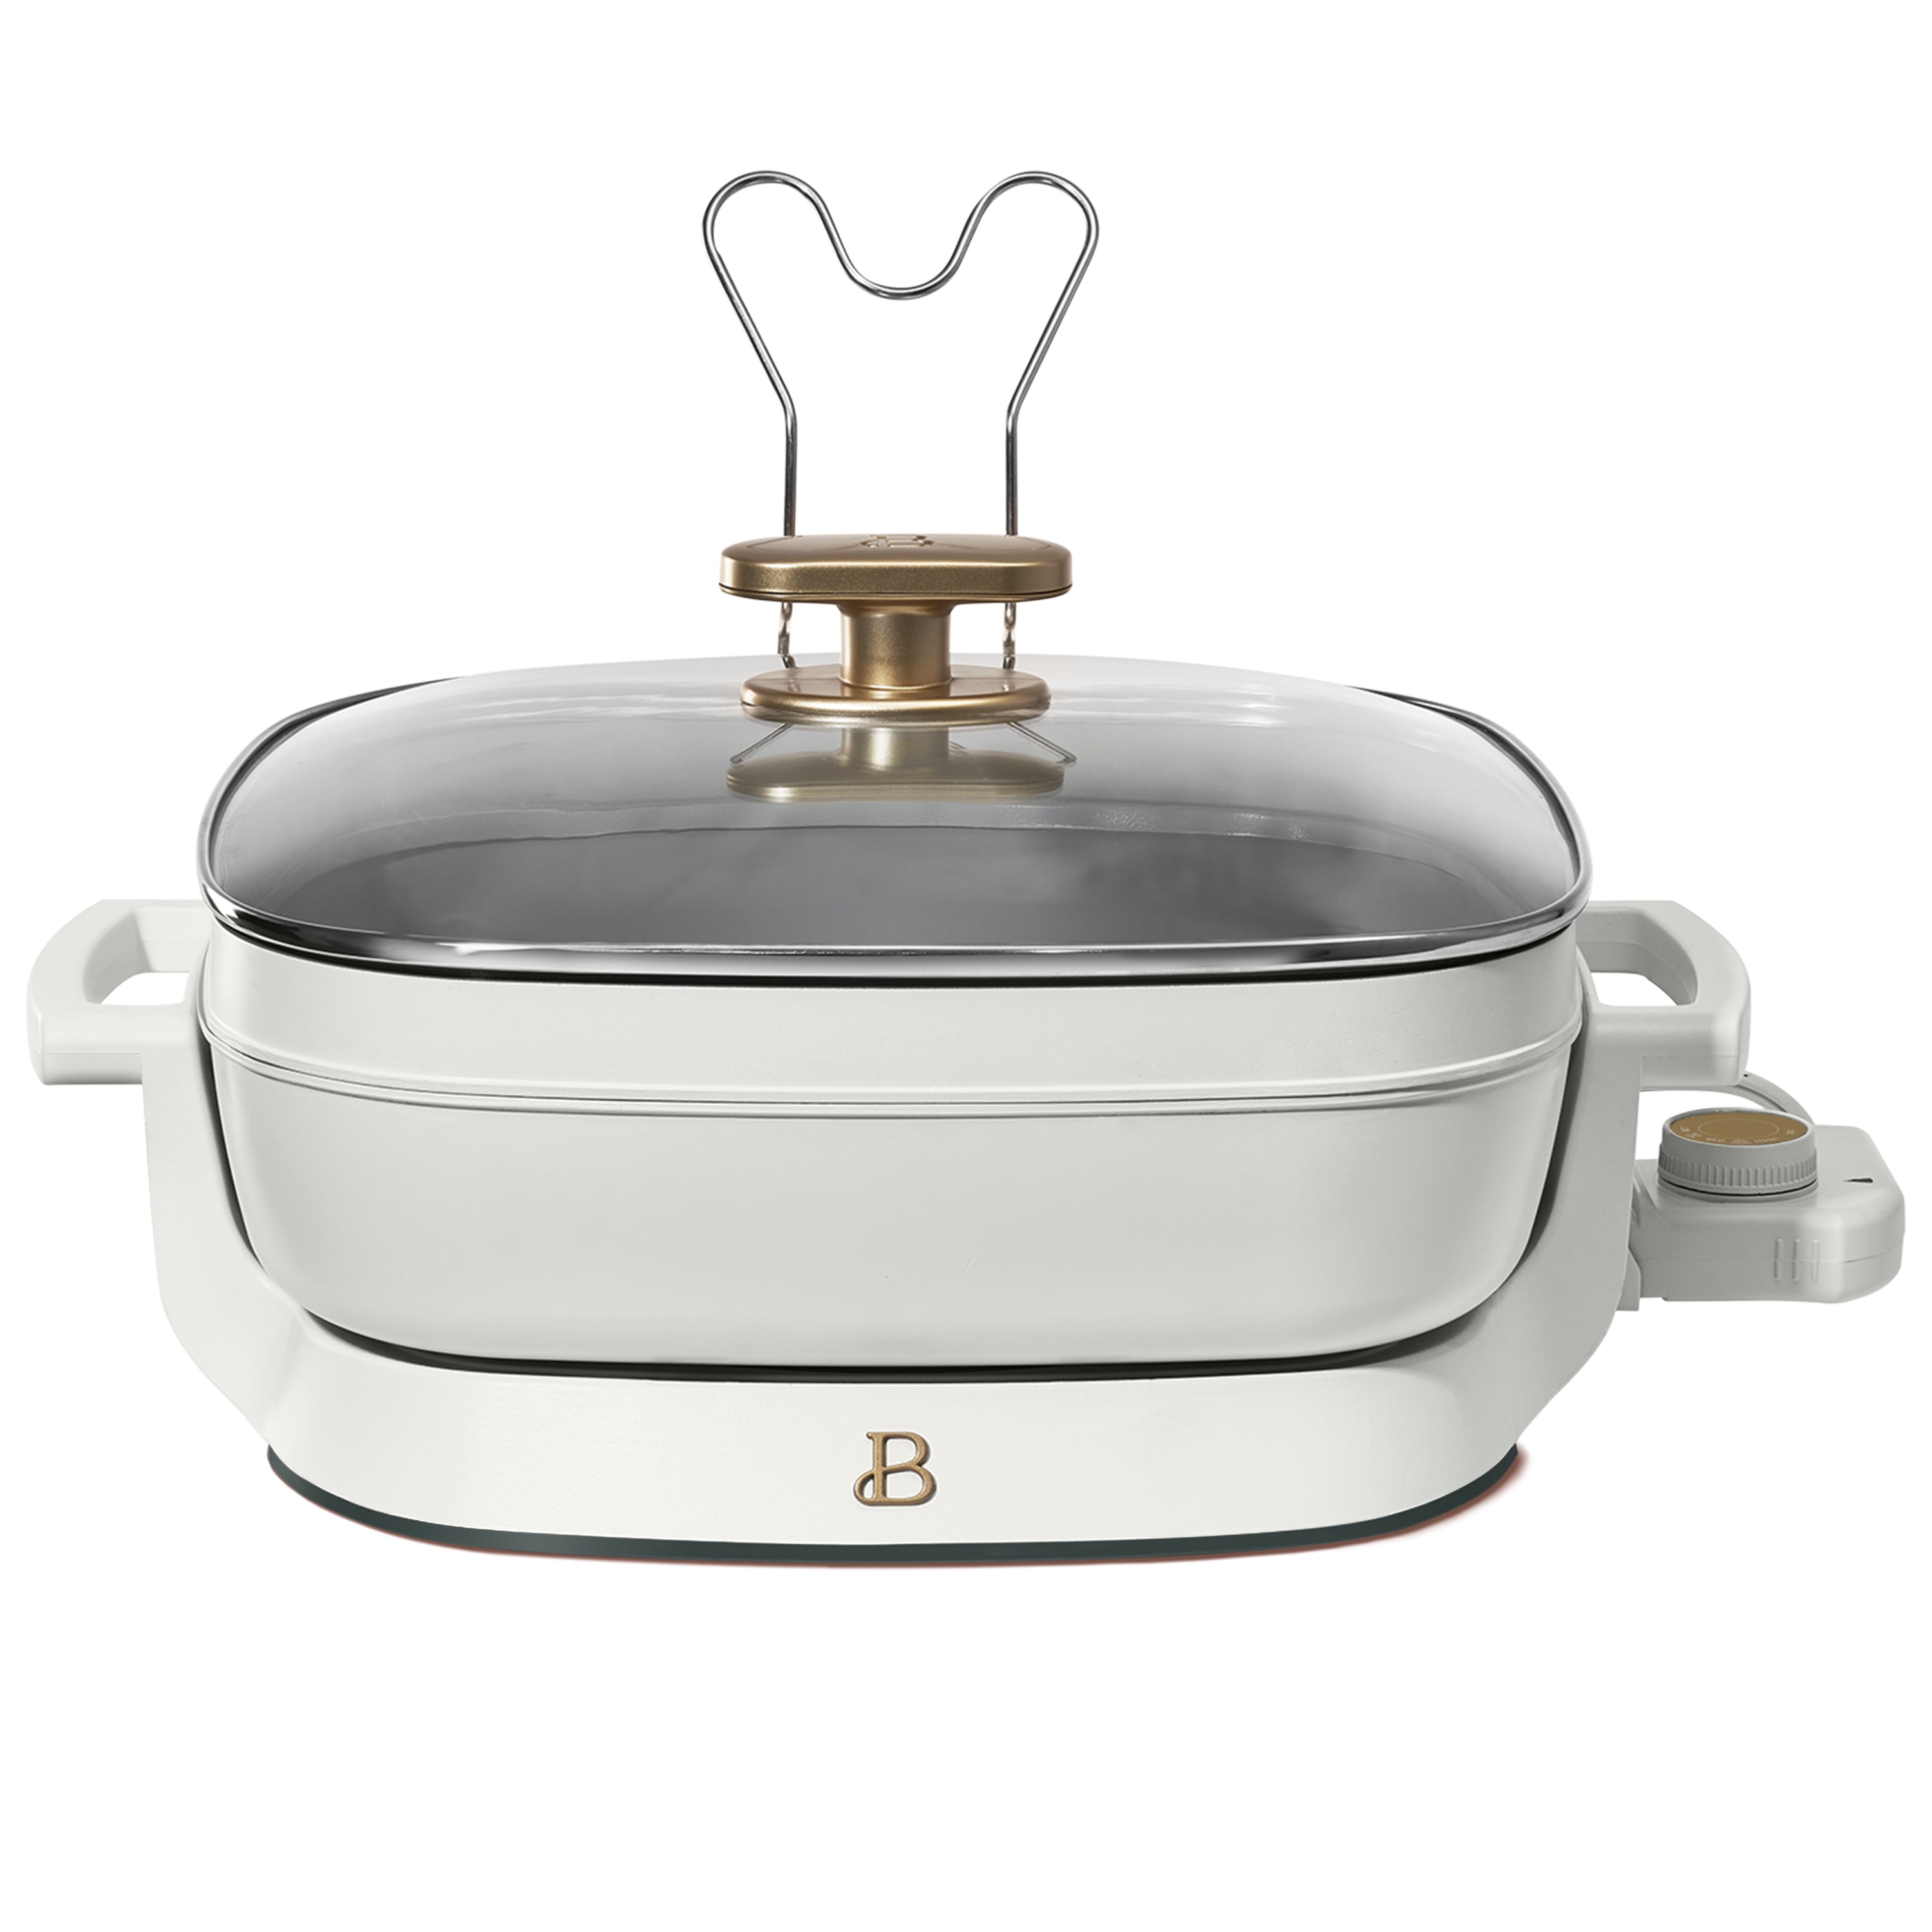 Beautiful 5-in-1 Electric Expandable Skillet, White Icing by Drew Barrymore, Up to 7 QT